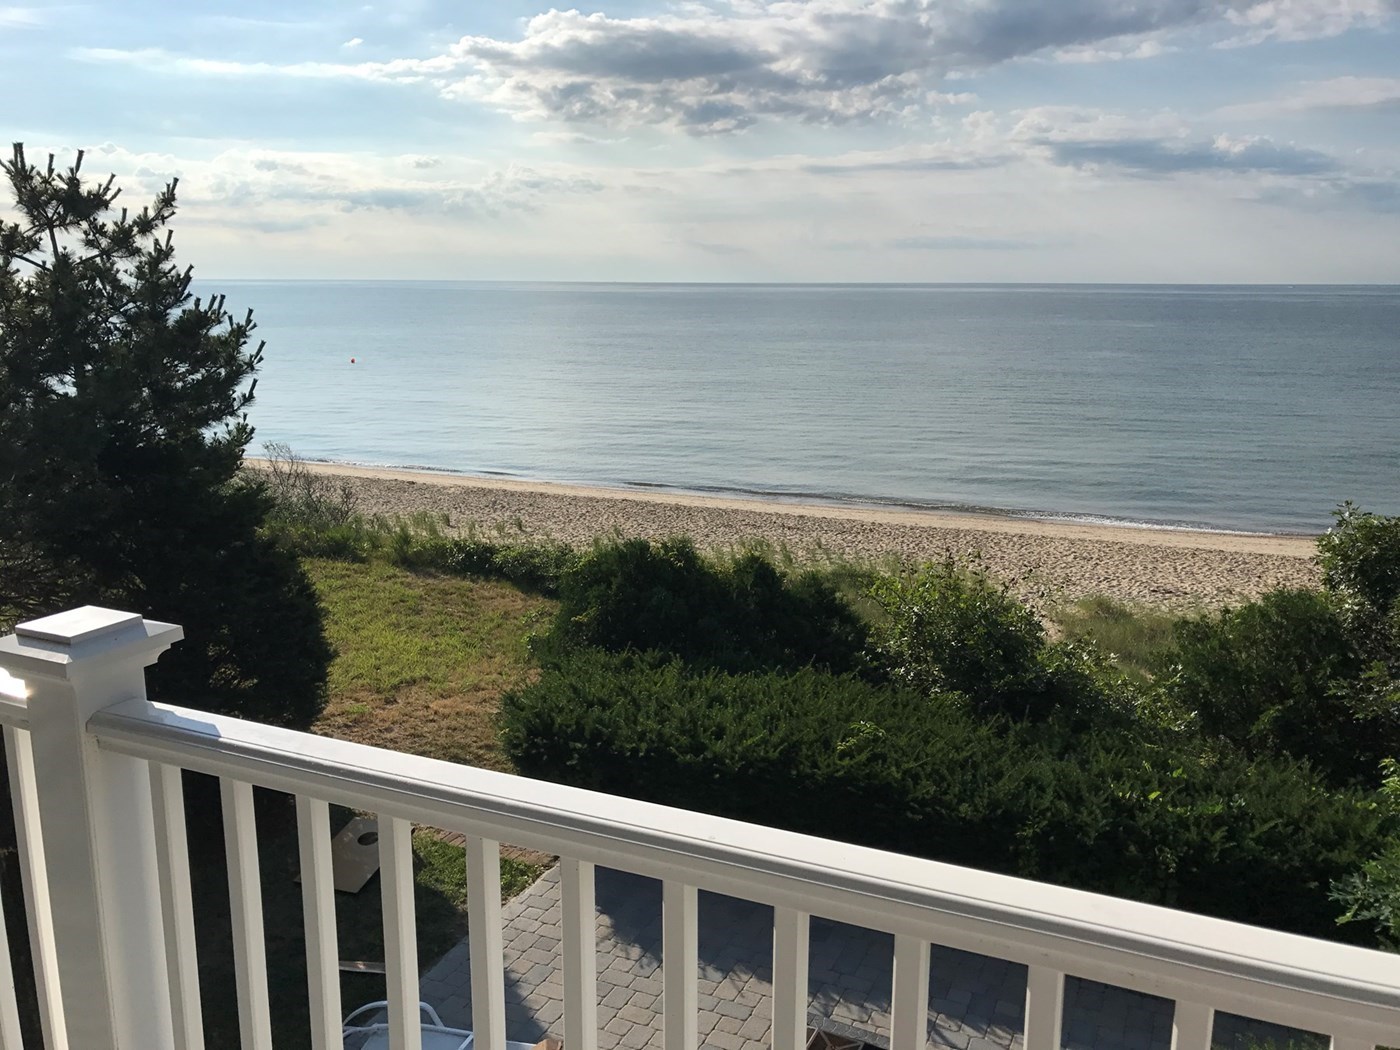 Looking to visit Mashpee this summer? We've found the perfect stays  in the area!